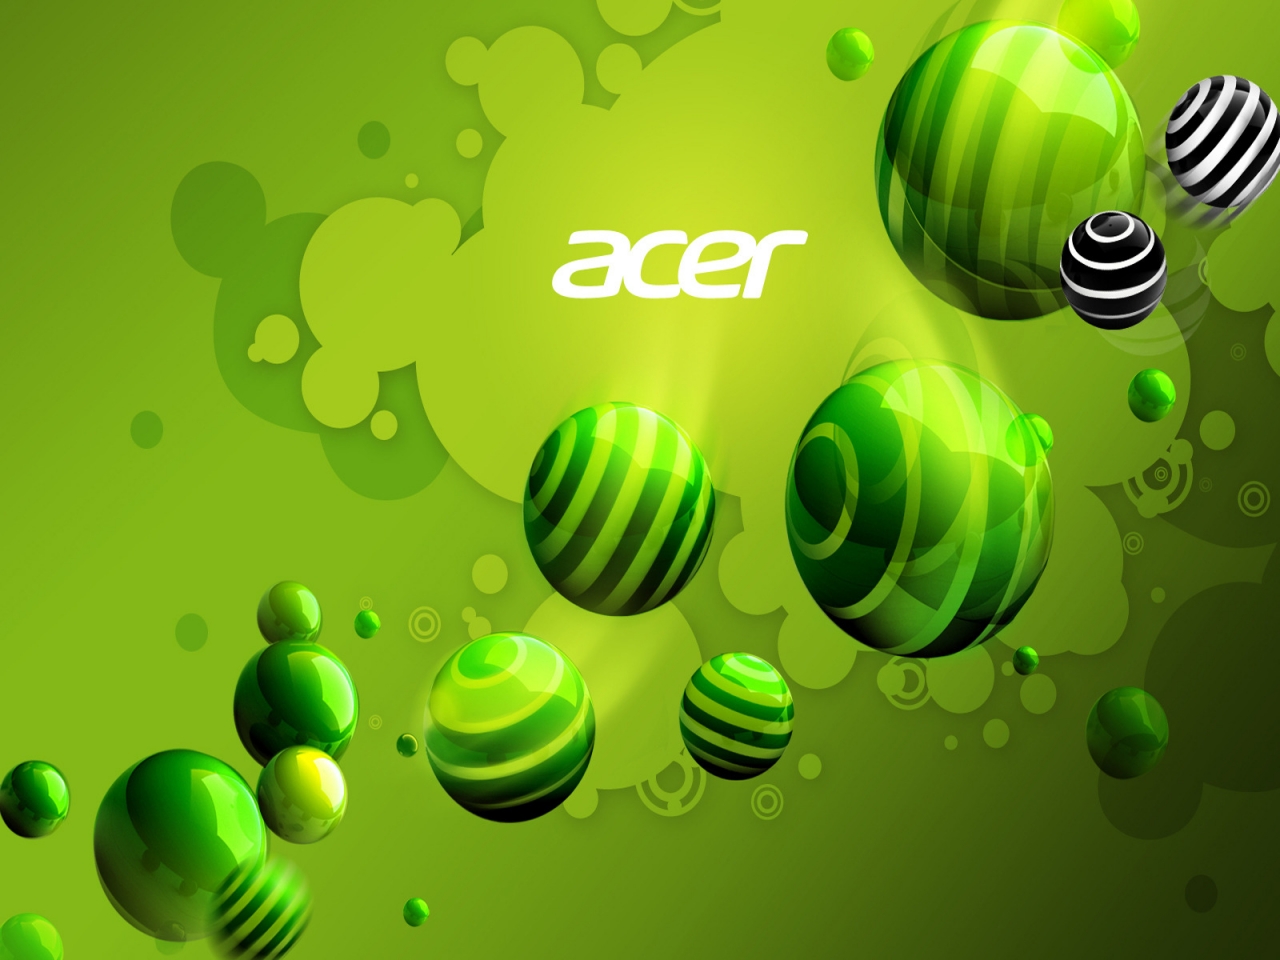 Acer Green World for 1280 x 960 resolution